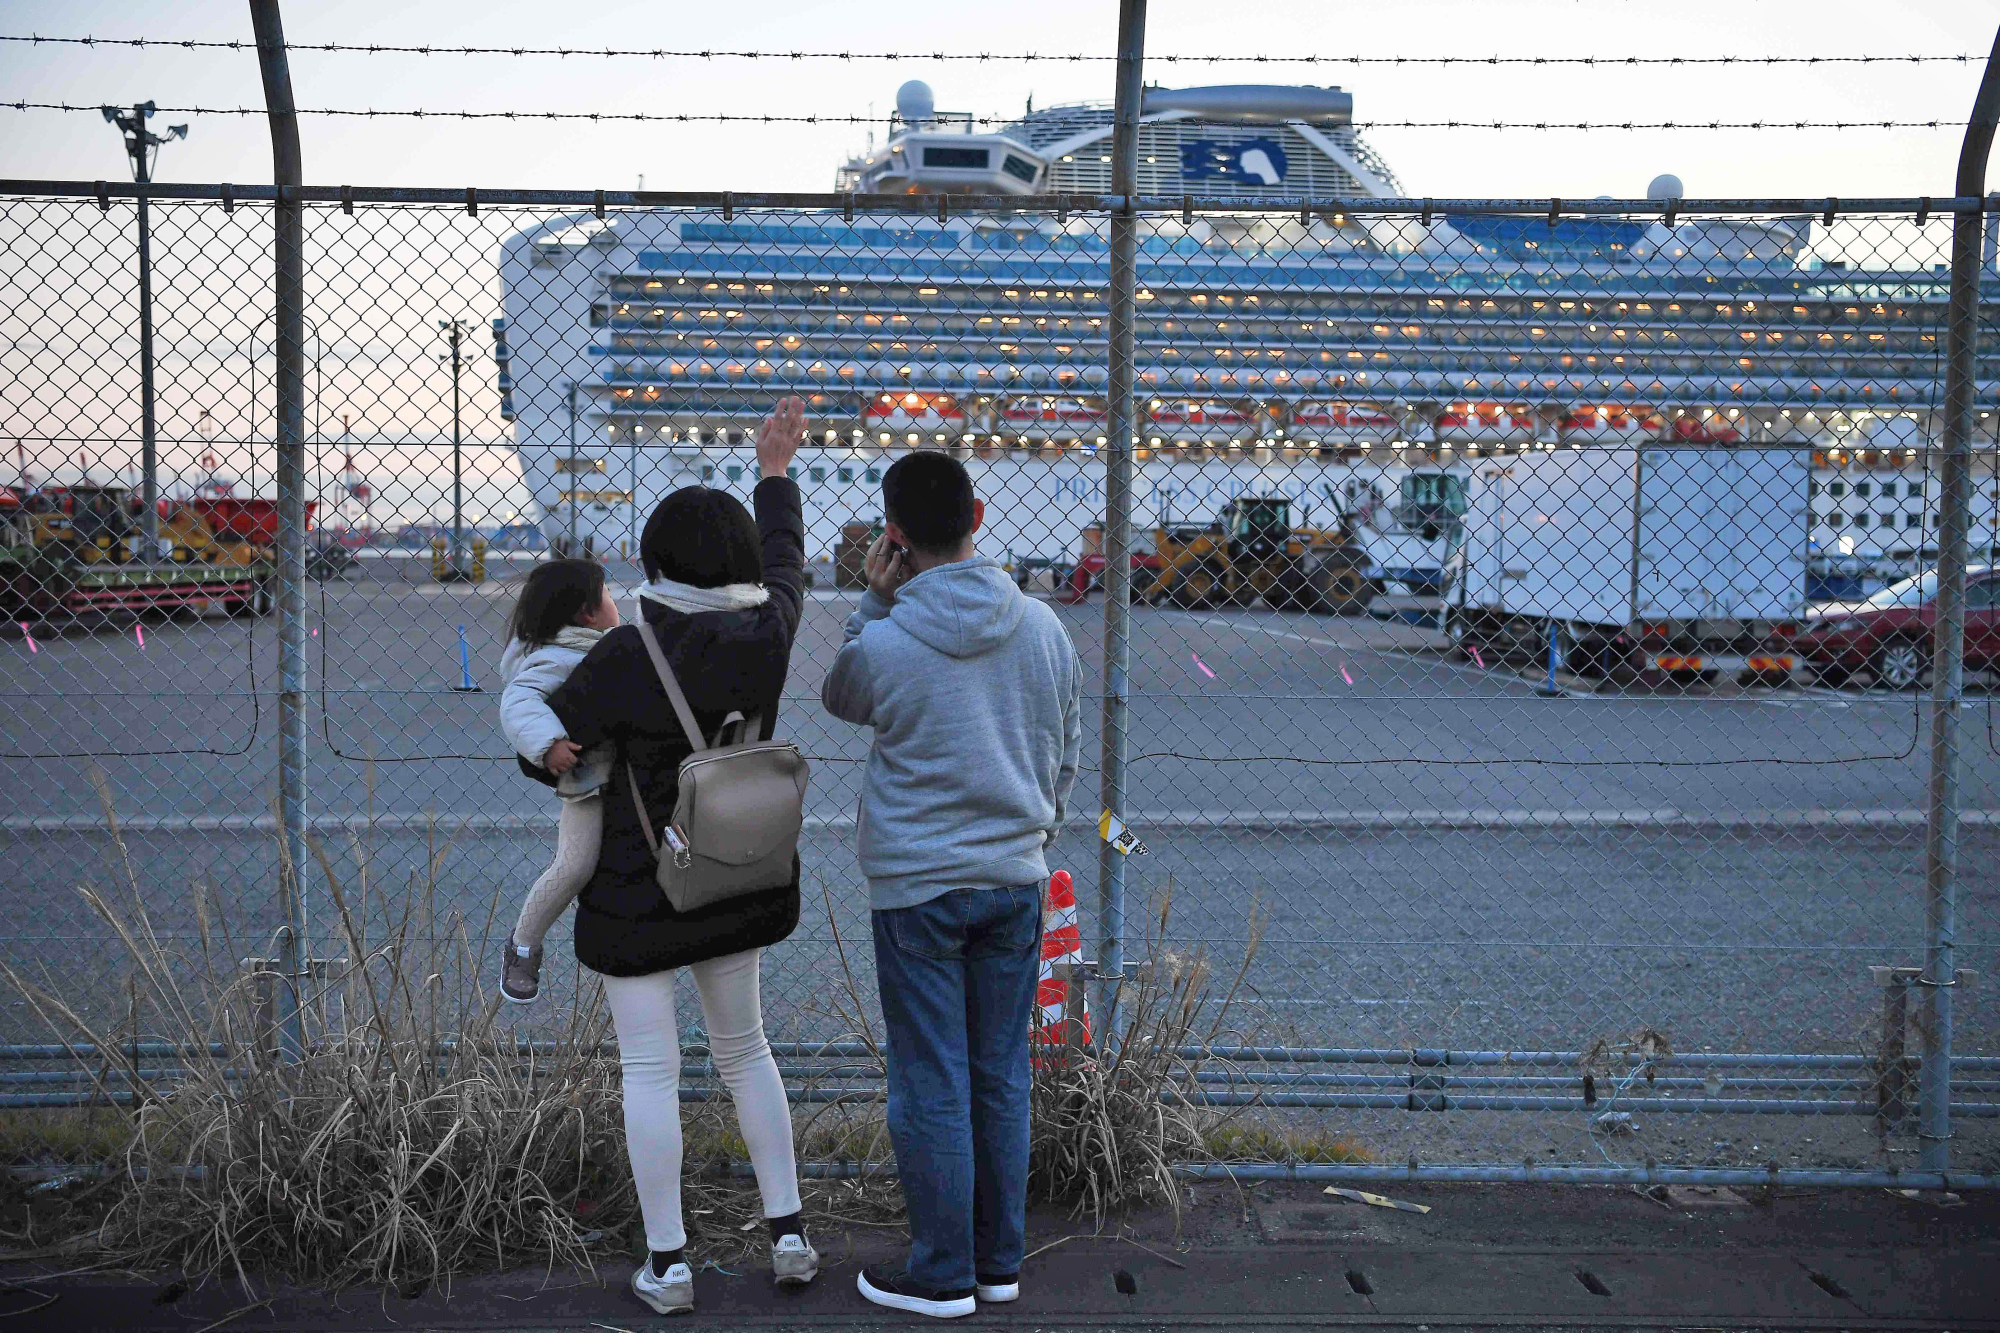 Relatives of passengers wave towards the Diamond Princess cruise ship, with around 3,600 people quarantined onboard due to fears of the new coronavirus. | AFP-JIJI